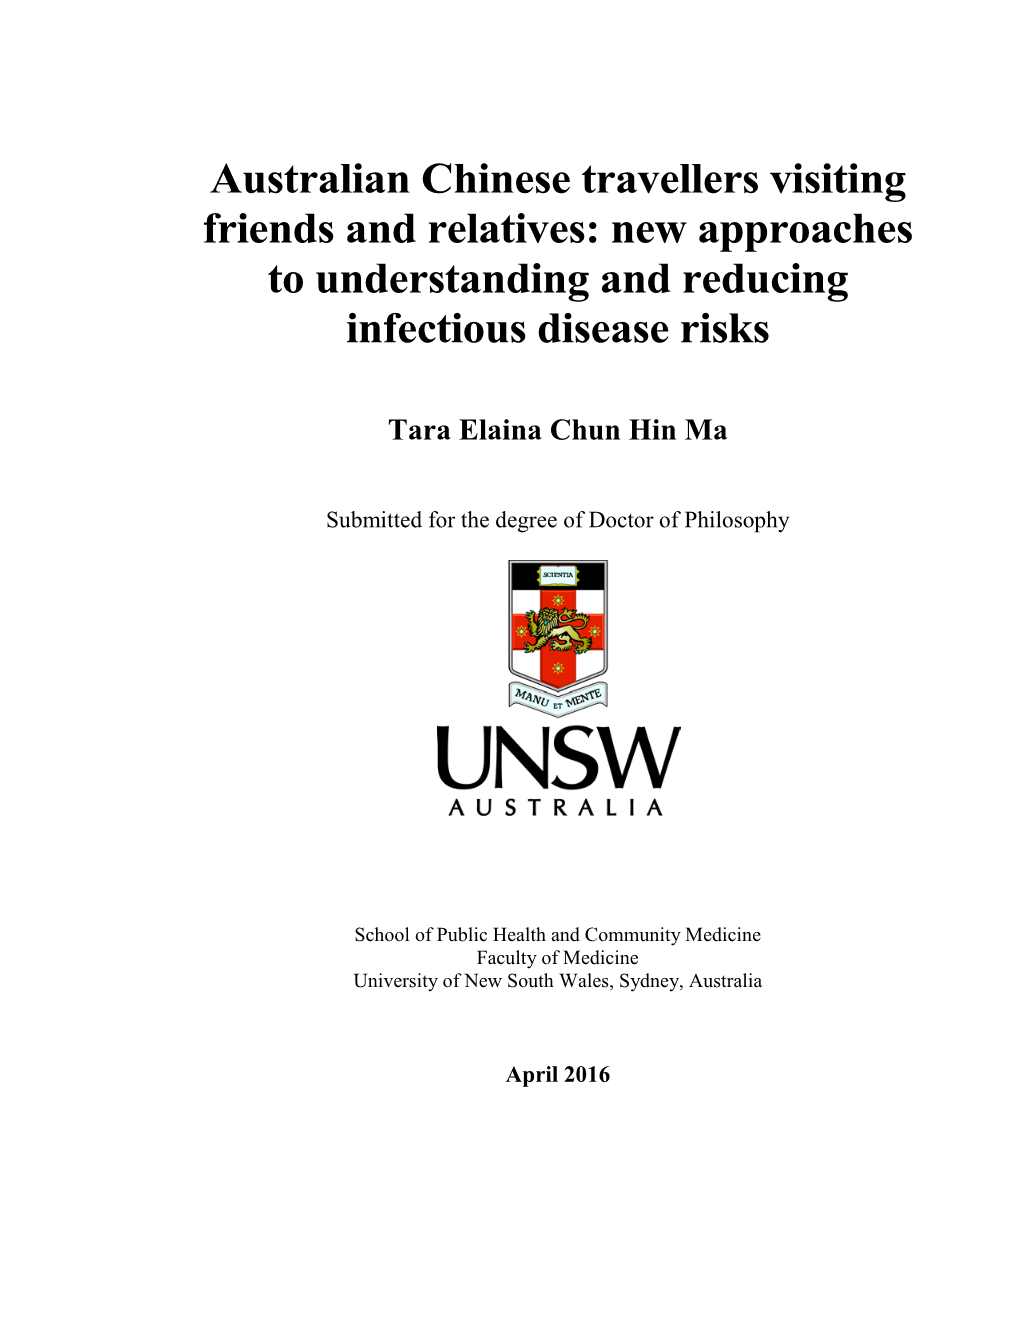 Australian Chinese Travellers Visiting Friends and Relatives: New Approaches to Understanding and Reducing Infectious Disease Risks